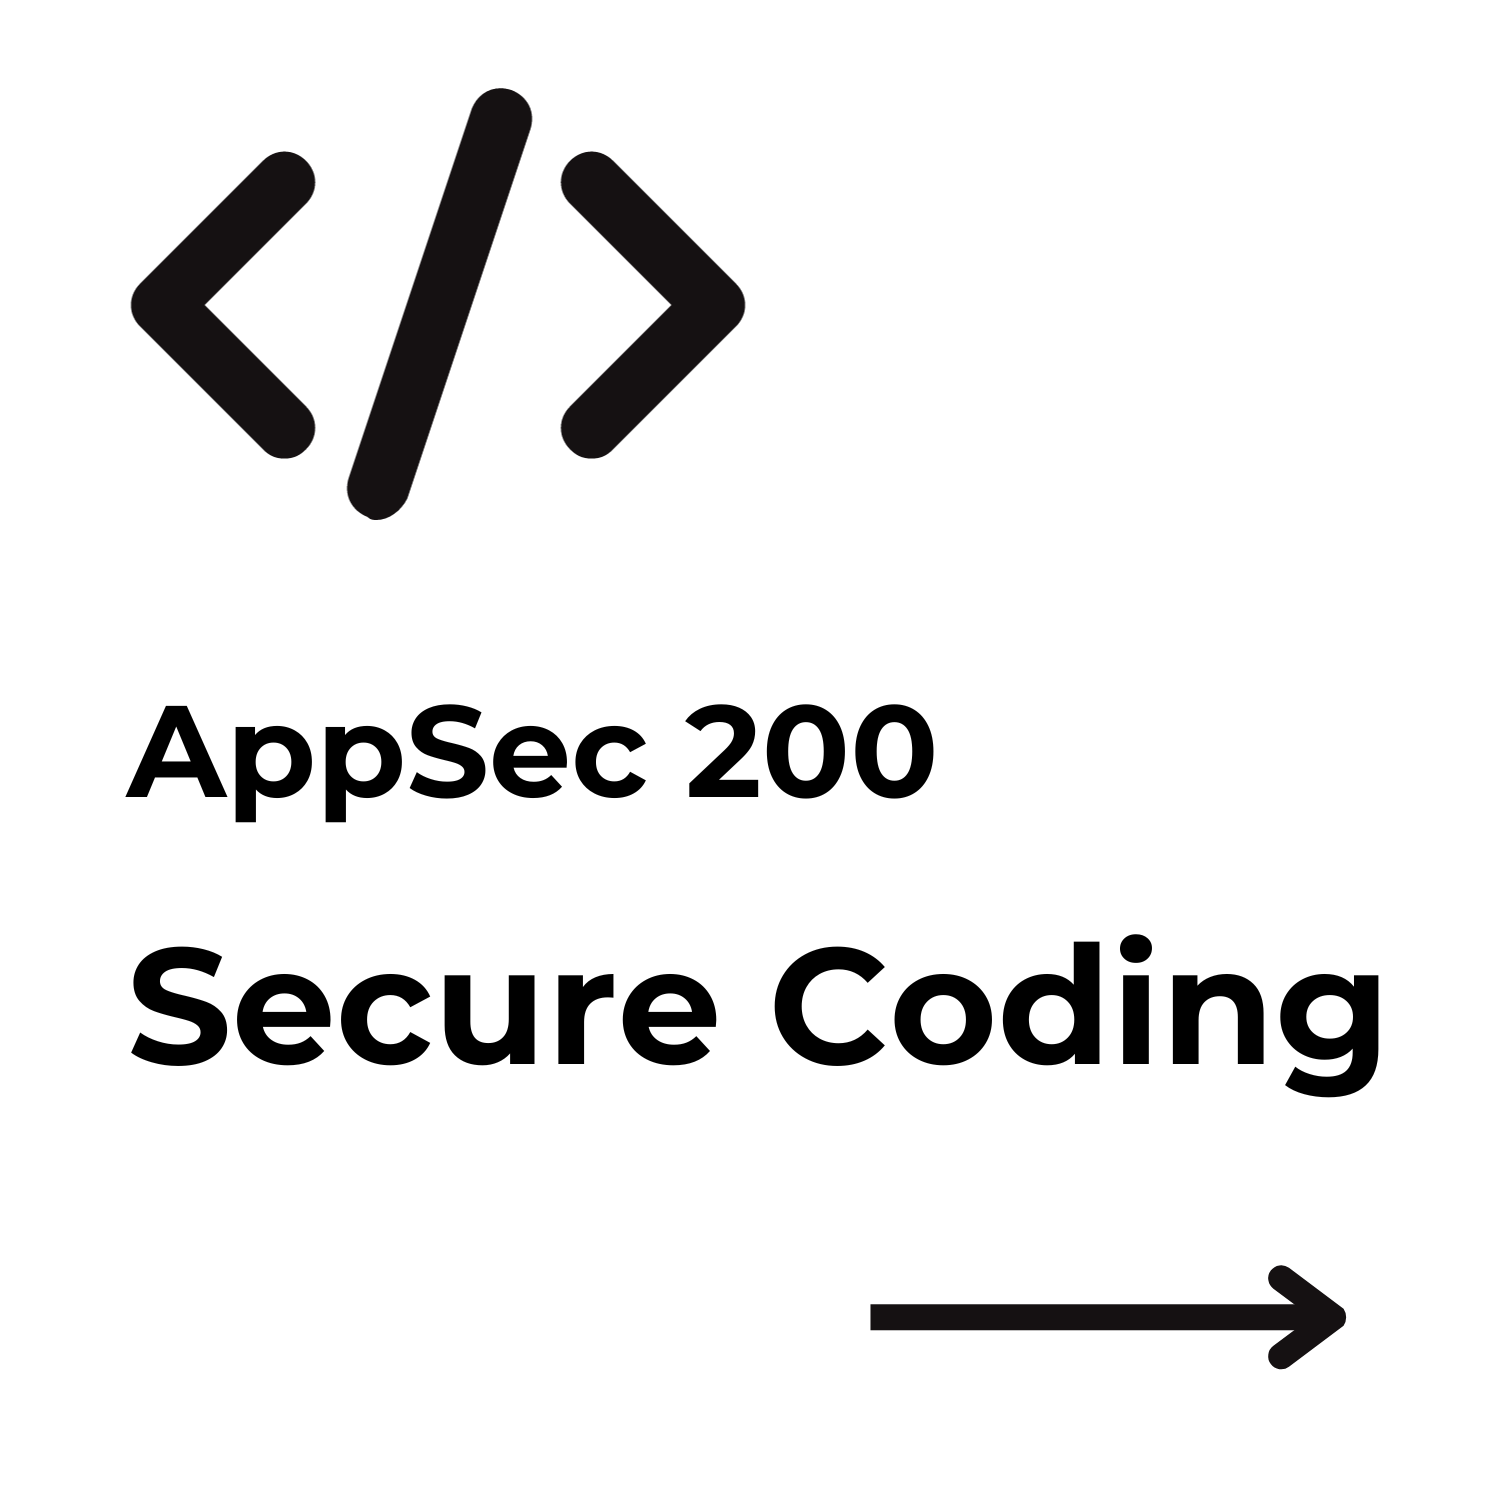 Link to AppSec200 training Secure Coding